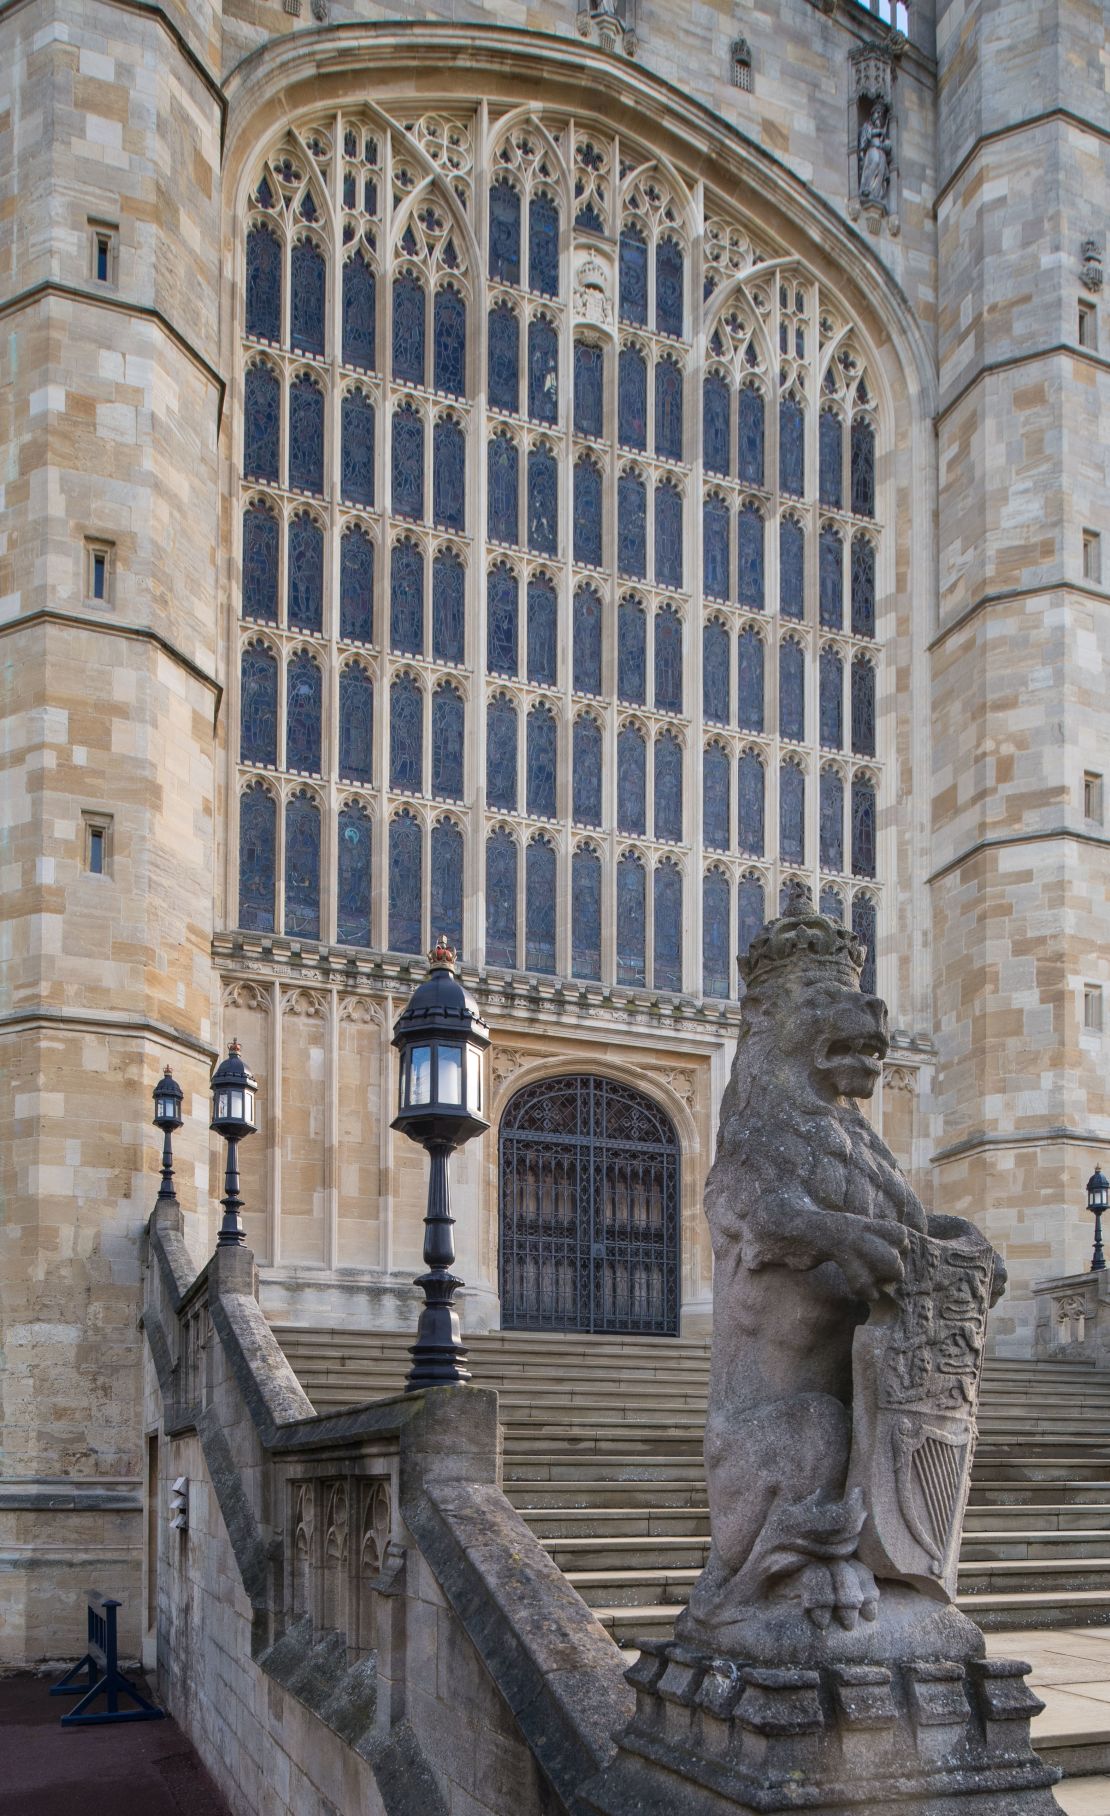 The steps to St George's Chapel, guarded by crowned lion, which features on the royal coat of arms.